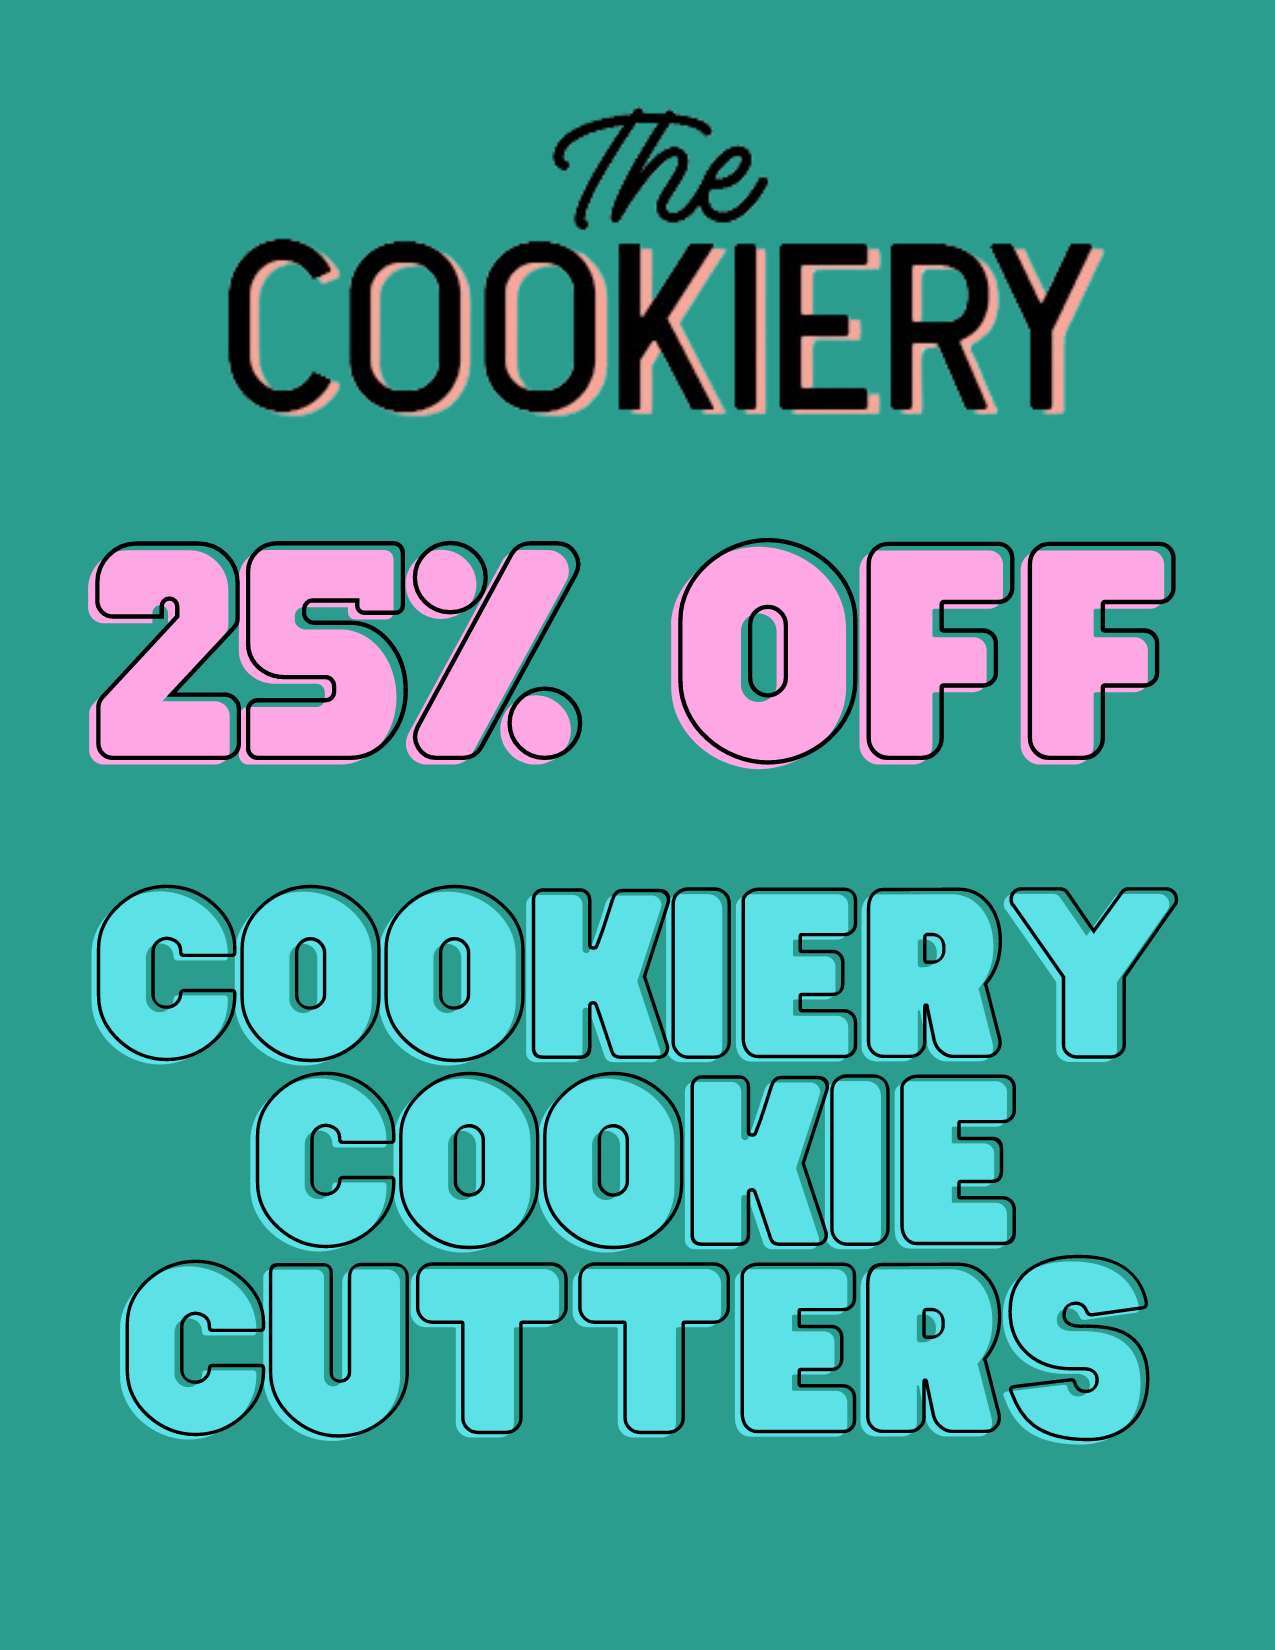 The Cookiery. 25% off Cookiery cookie cutters